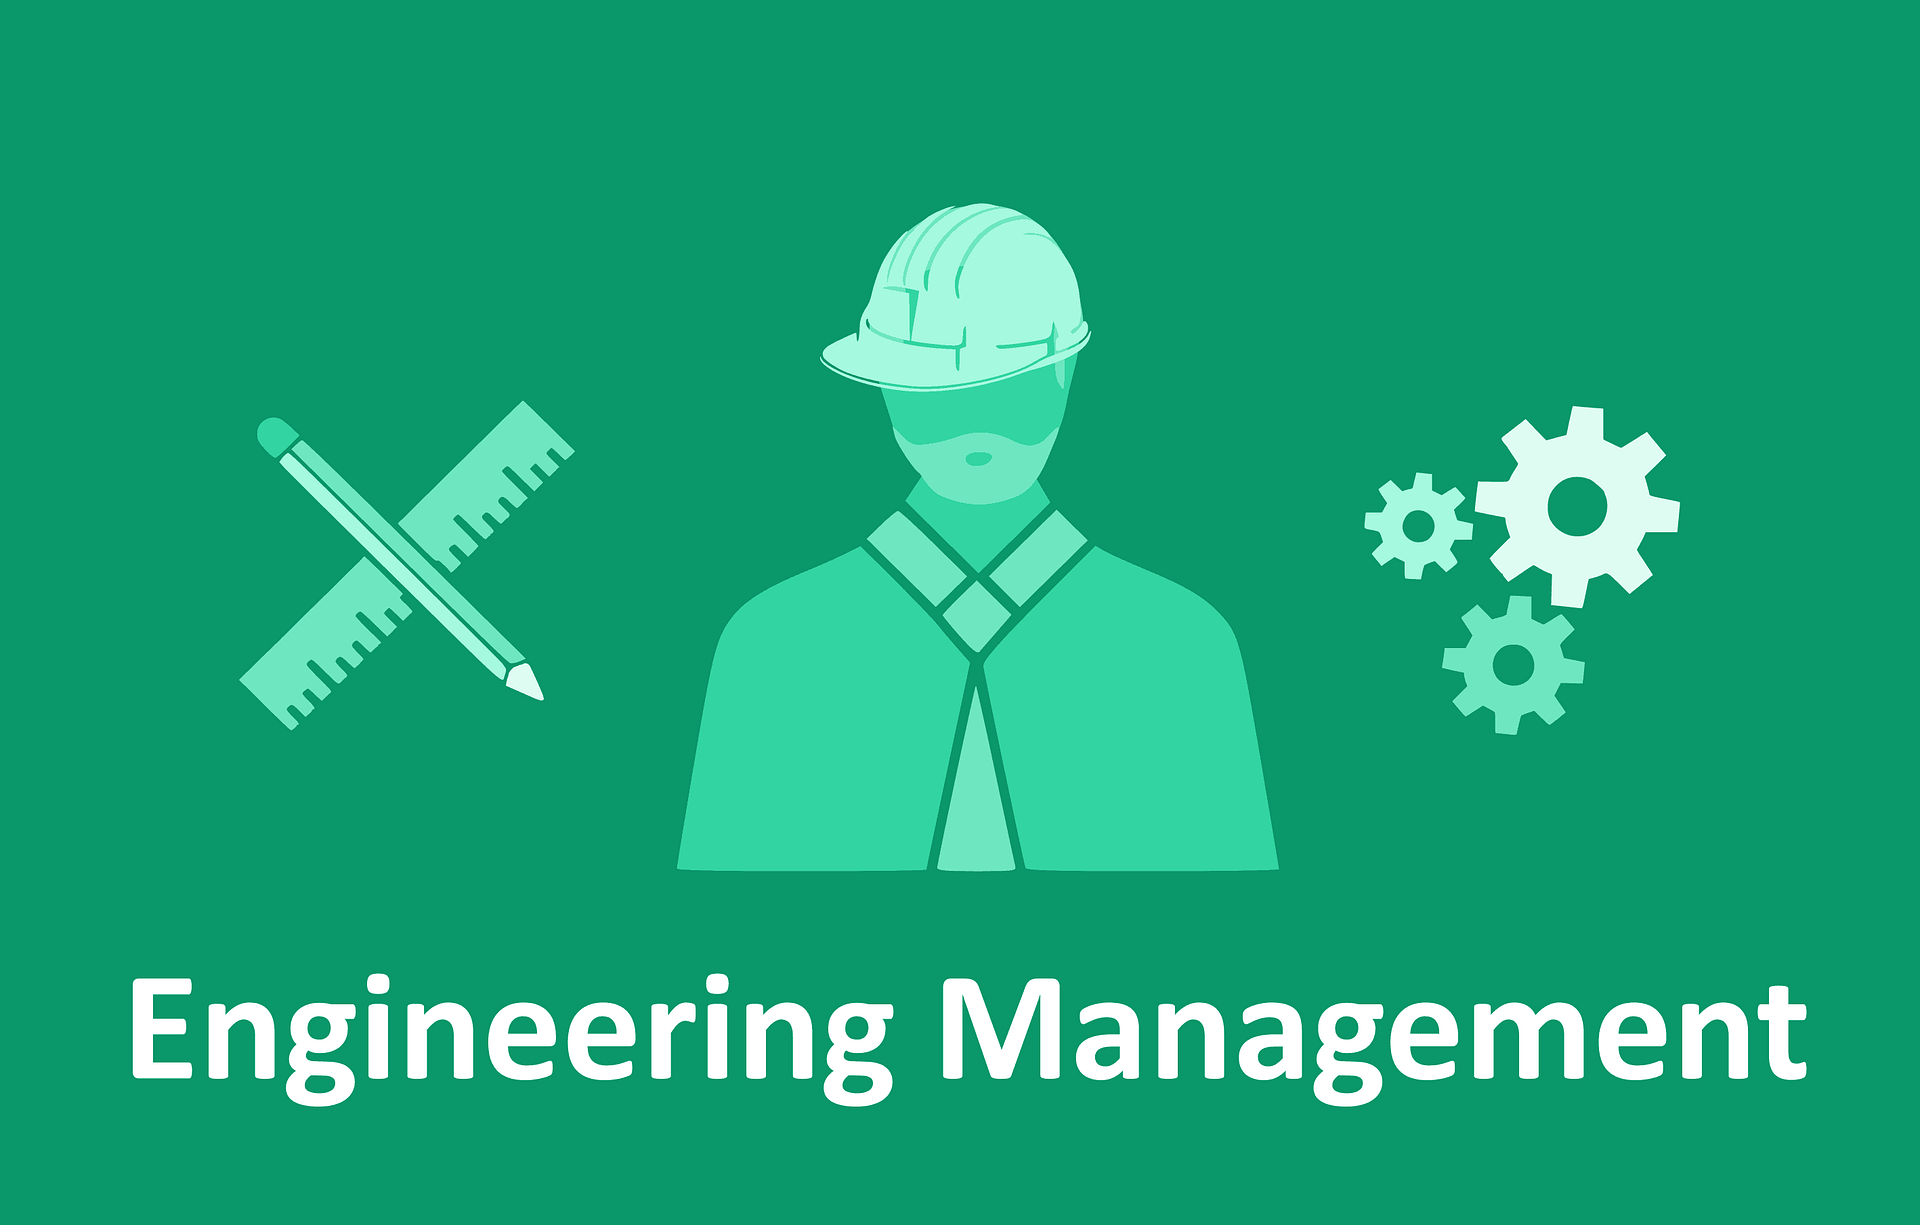 Organisational Design for Engineering managers, production supervisors and managers, and operations managers.